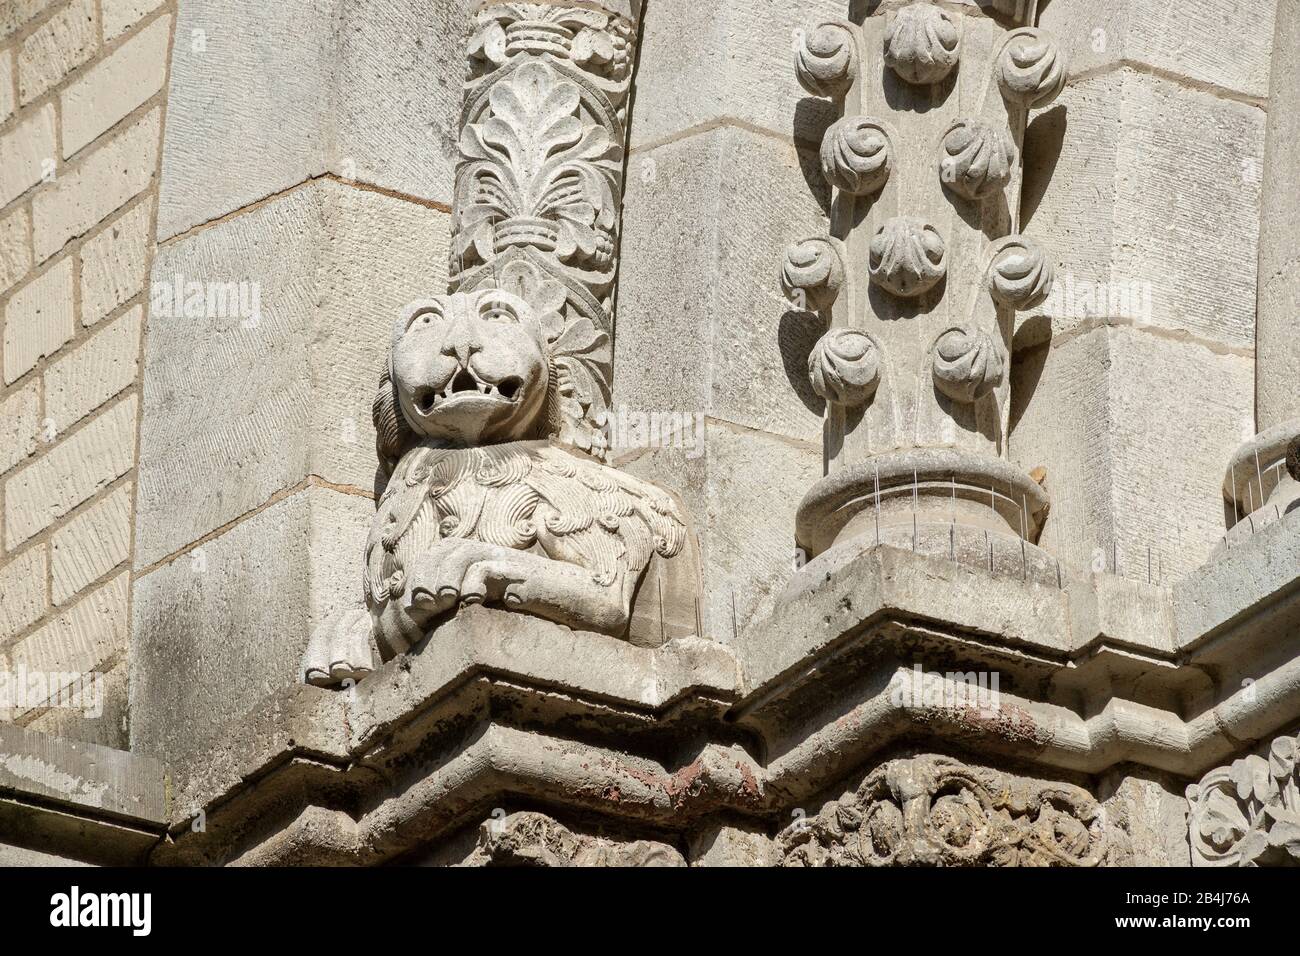 Germany, North Rhine-Westphalia, Cologne, lion at the base of the west portal arch of the church Groß St. Martin. The church is one of the twelve major Romanesque churches in the center of Cologne. It has a Vierungsturm with 4 corner turrets and is the landmark of the left bank of the city panorama. Stock Photo